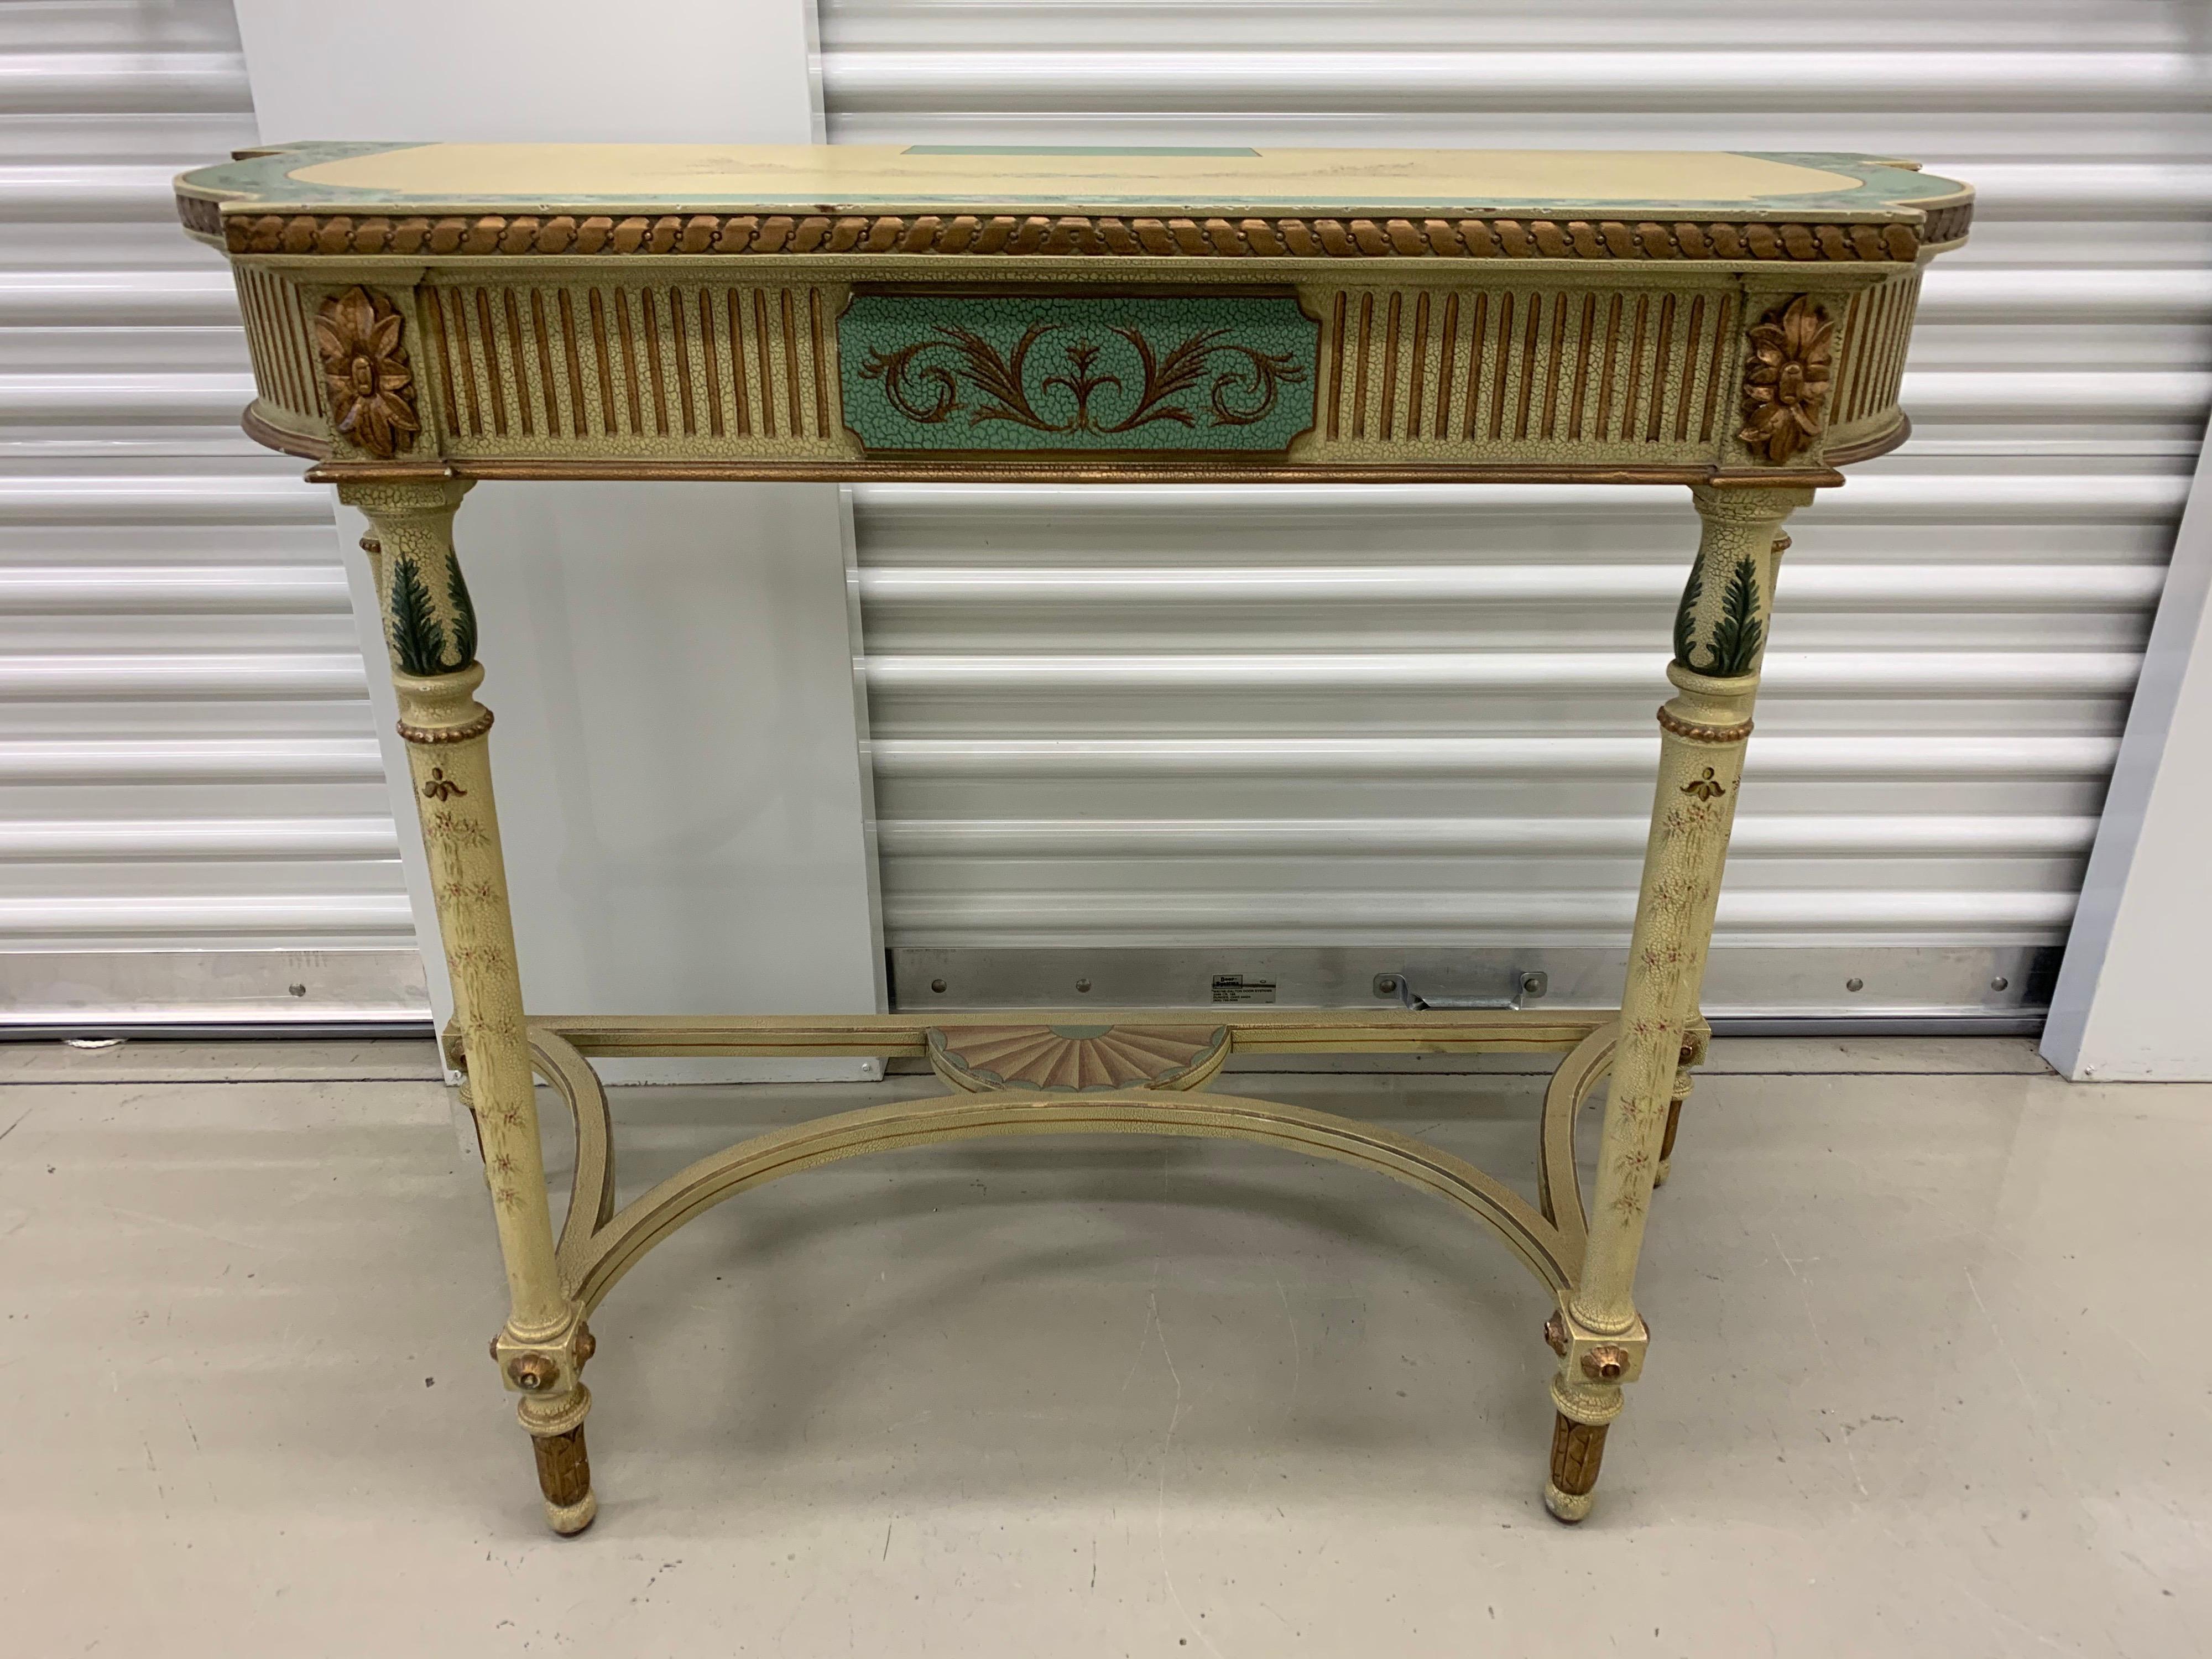 Signed Maitland Smith hand painted console table with lovely color scheme. Multipurpose, can be used
as console, foyer table or bar.